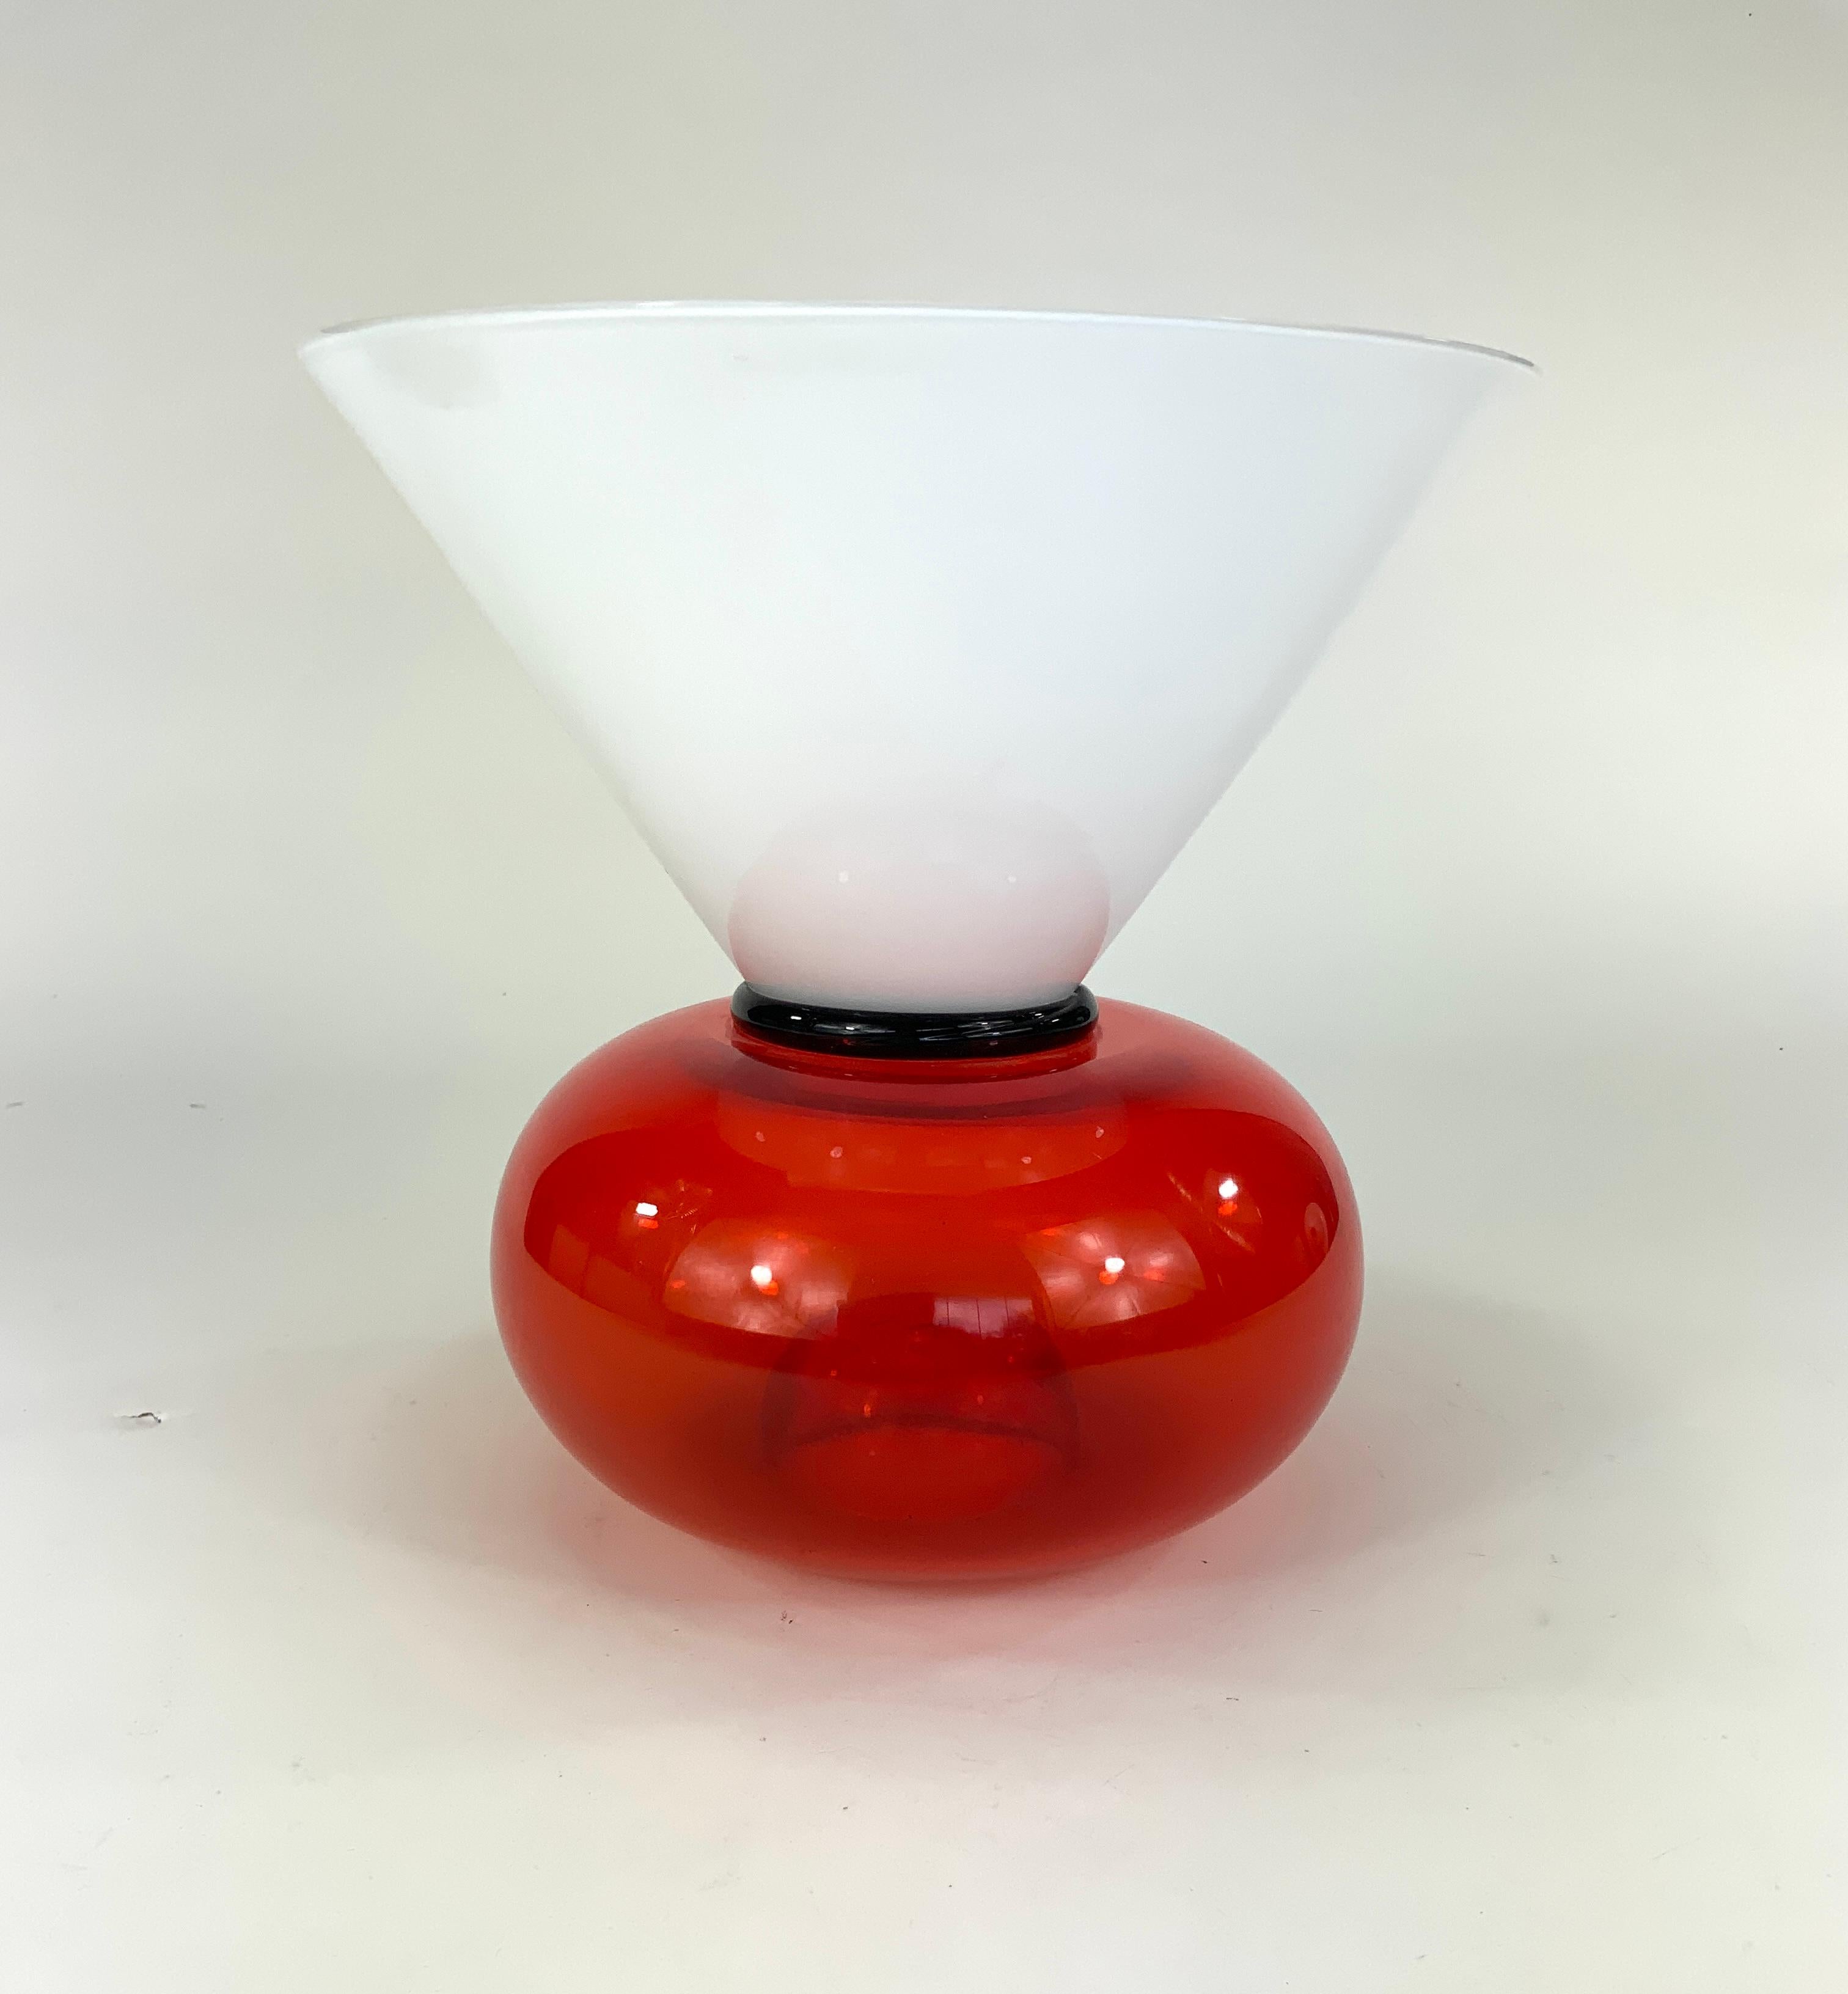 An extremely rare vase by the famous Italian designer and architect, Sergio Asti (1926-2021) for Vitreria Vistosi, master glassmakers of Murano glass art whose origins date back to 1585.

This vase, titled YONI, was part of a collection of 8 vases